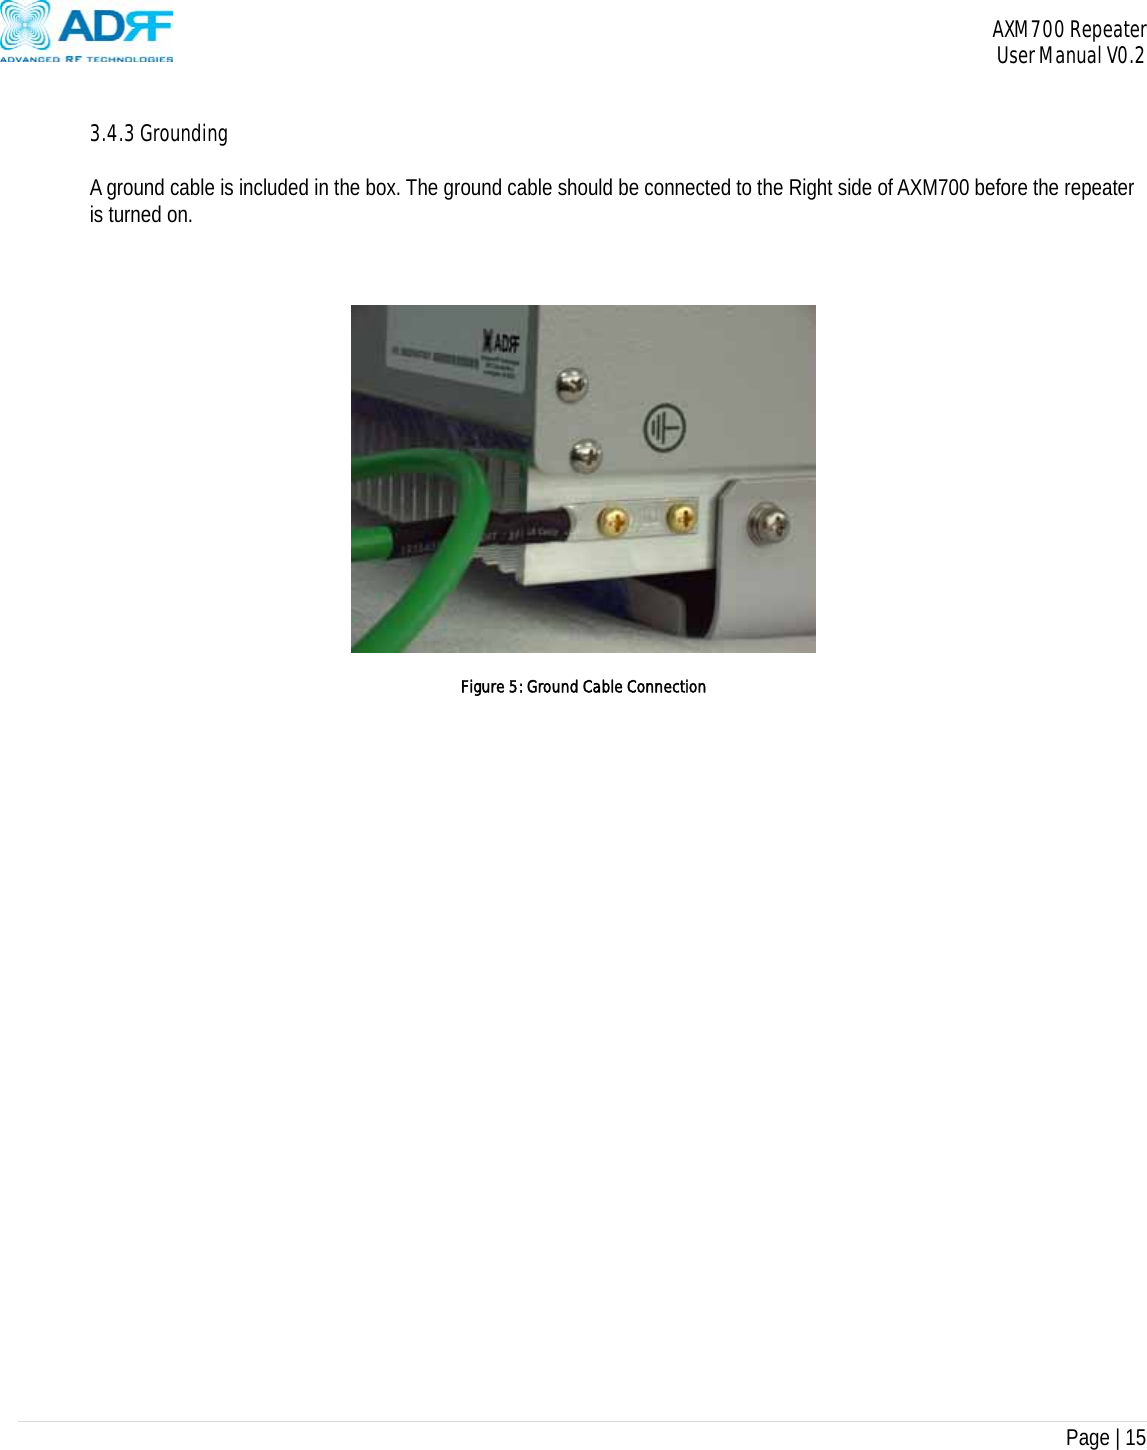 AXM700 Repeater     User Manual V0.2  Page | 15     3.4.3 Grounding  A ground cable is included in the box. The ground cable should be connected to the Right side of AXM700 before the repeater is turned on.         Figure 5: Ground Cable Connection                             